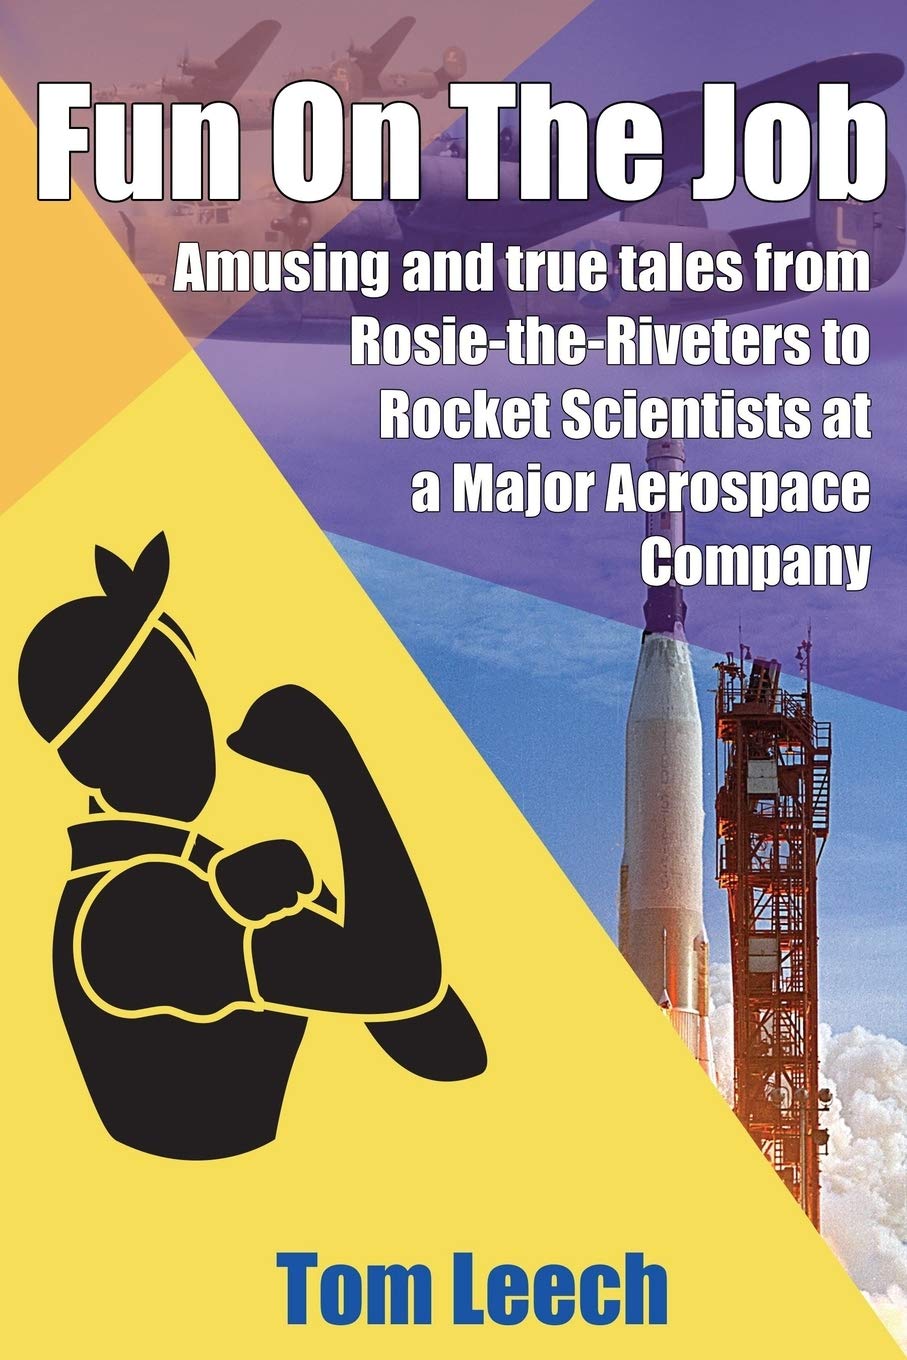 Fun on the Job: Amusing and True Tales from Rosie-the-Riveters to Rocket Scientists at a Major Aerospace Company